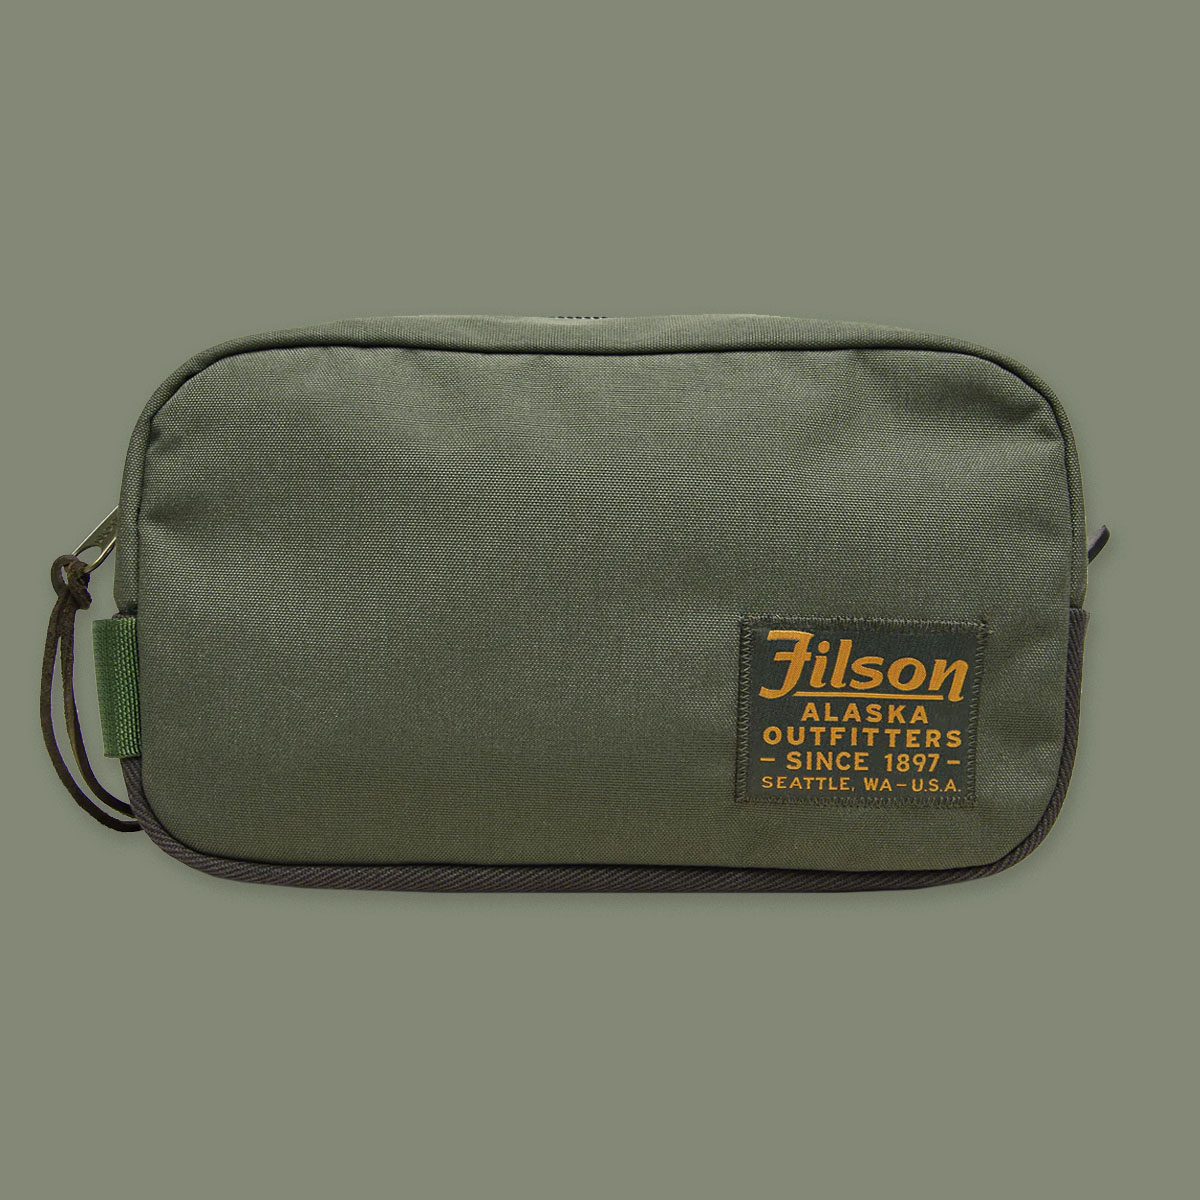 Filson Travel Pack Otter Green, made of tear-resistant ballistic nylon and reinforced with Filson's famous Rugged Twill